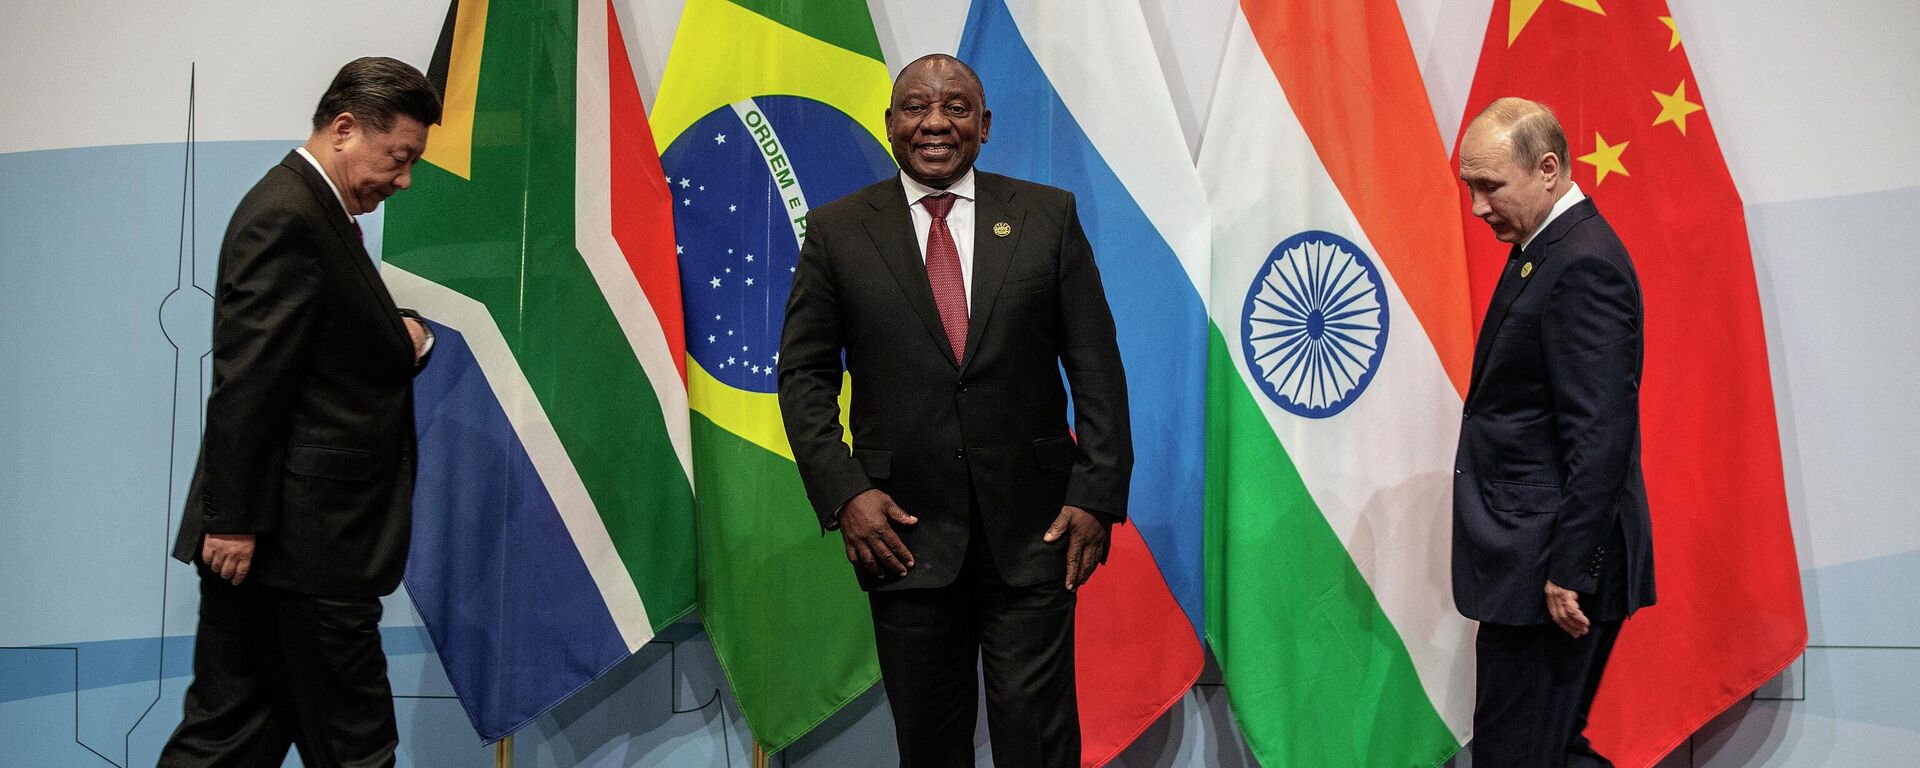 (LtoR) China's President Xi Jinping, South Africa's President Cyril Ramaphosa and Russia's President Vladimir Putin arrive to pose for a group picture during the 10th BRICS (acronym for the grouping of the world's leading emerging economies, namely Brazil, Russia, India, China and South Africa) summit on July 26, 2018 at the Sandton Convention Centre in Johannesburg, South Africa. - Sputnik International, 1920, 21.08.2023